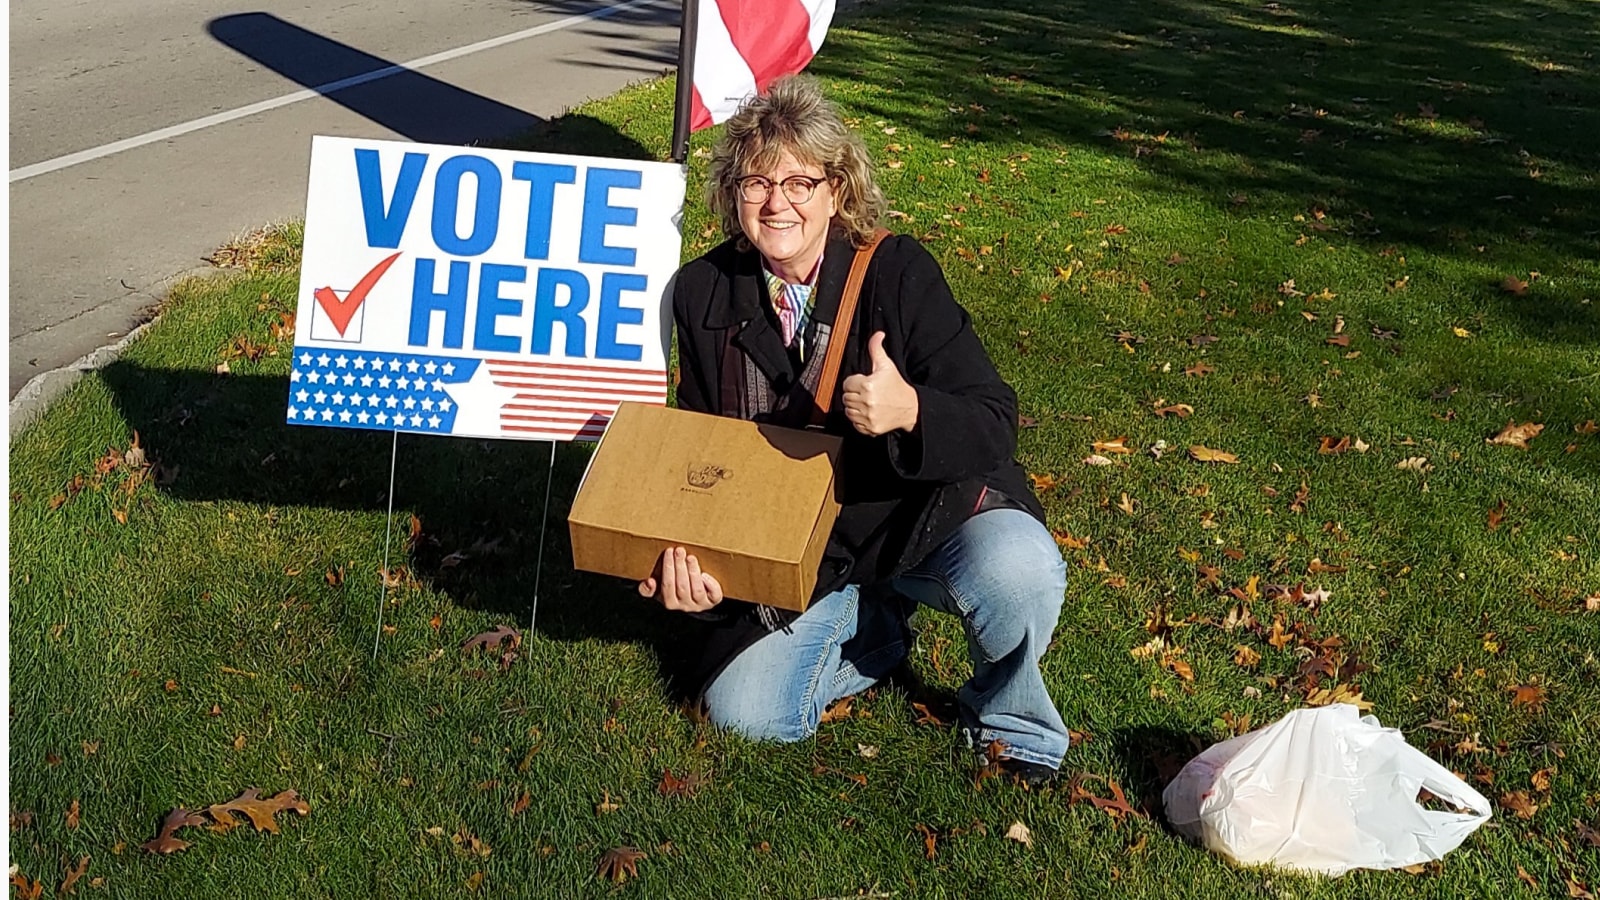 A woman kneeling near voting flag with a thumbs up.